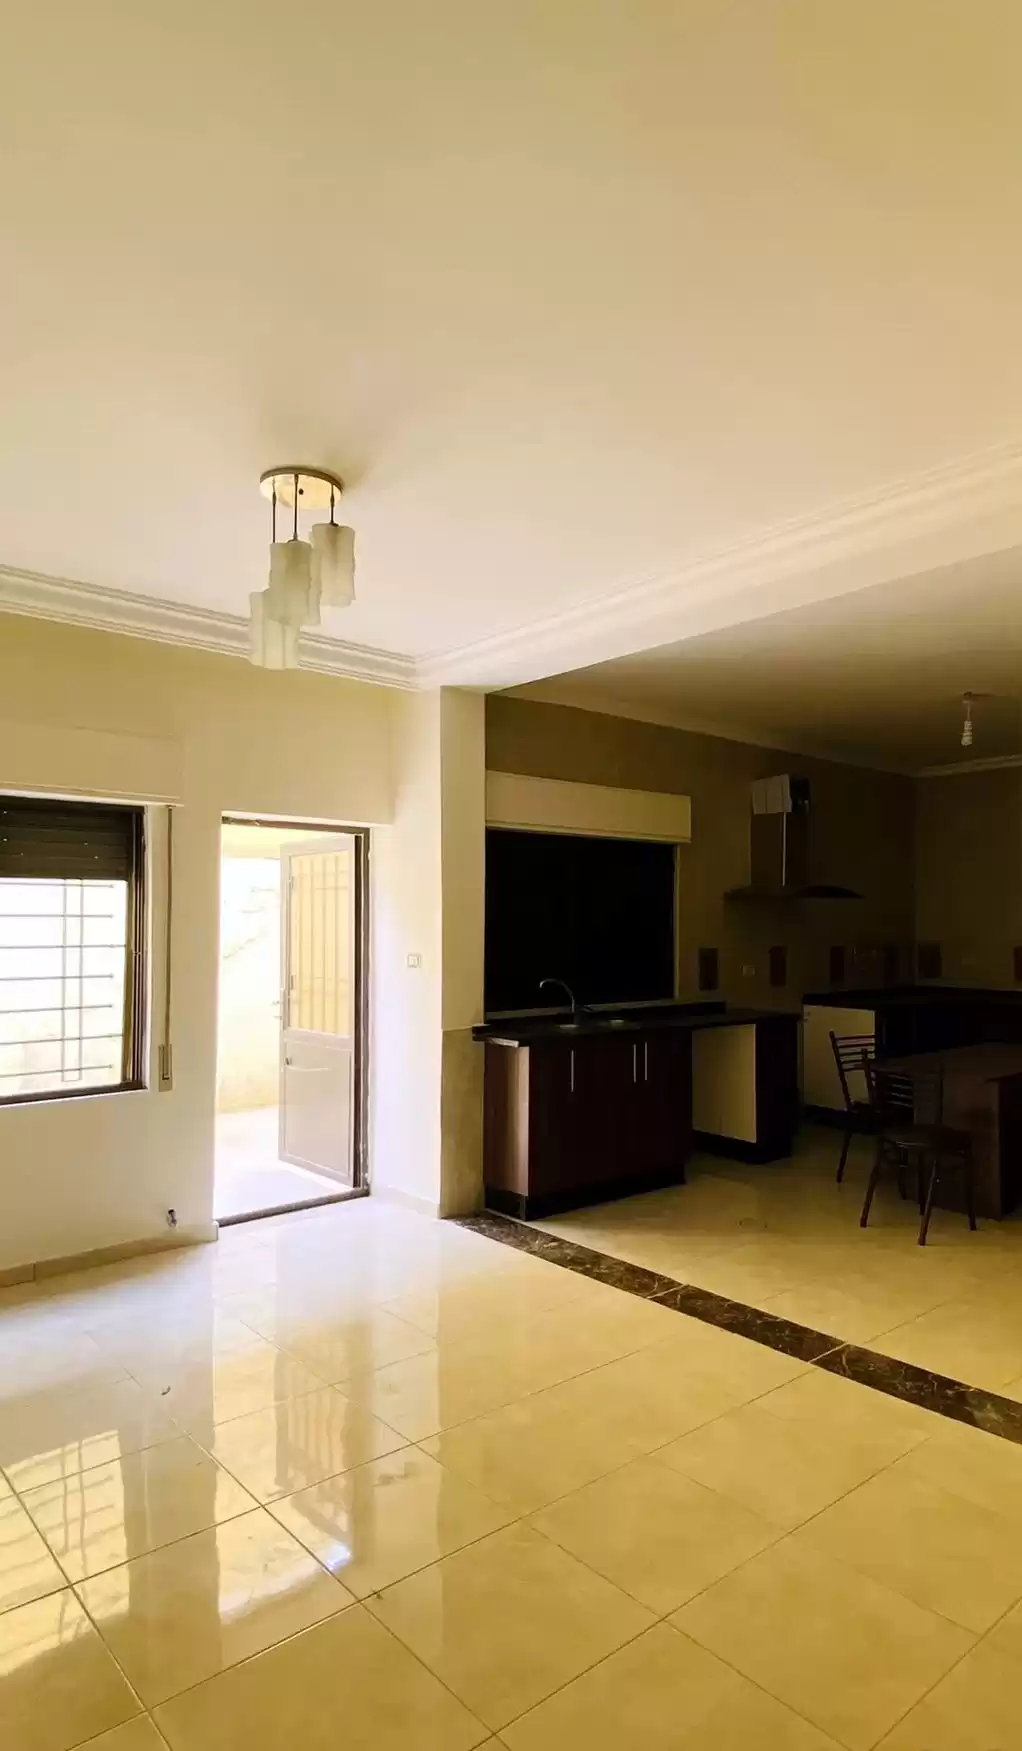 Residential Ready Property 3 Bedrooms U/F Apartment  for rent in Amman #26026 - 1  image 